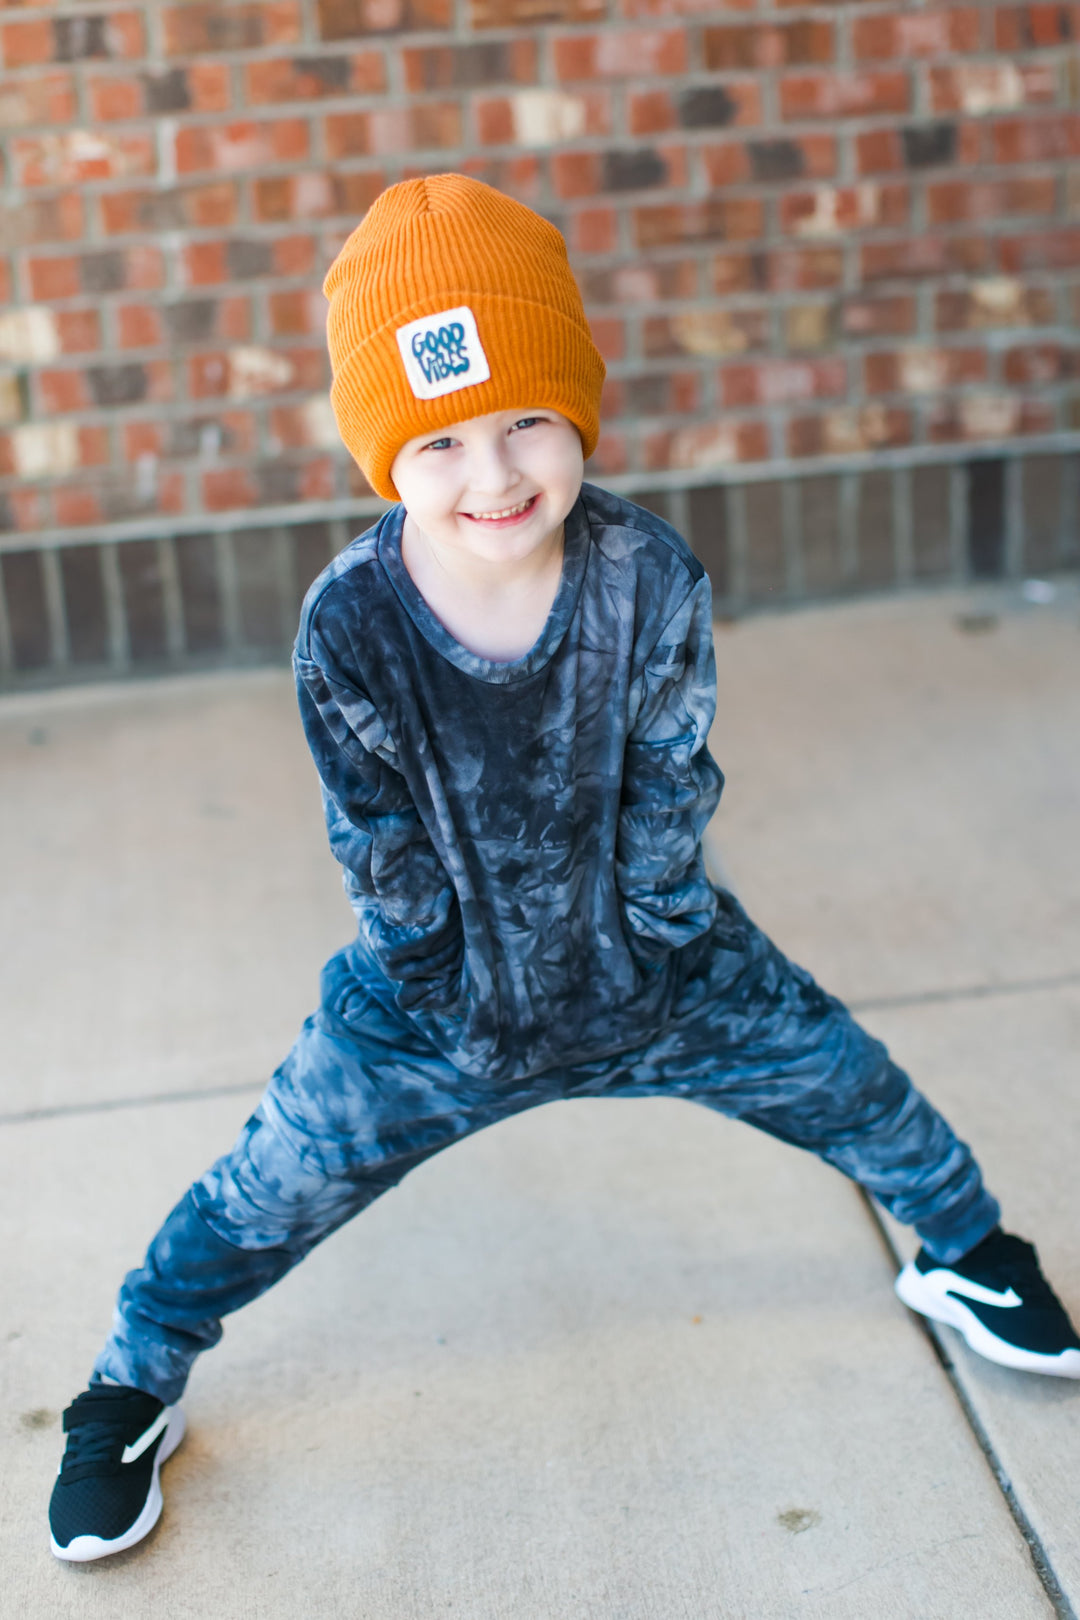 Tiny Whales - Good Vibes Beanie in Rust (2-5yrs)